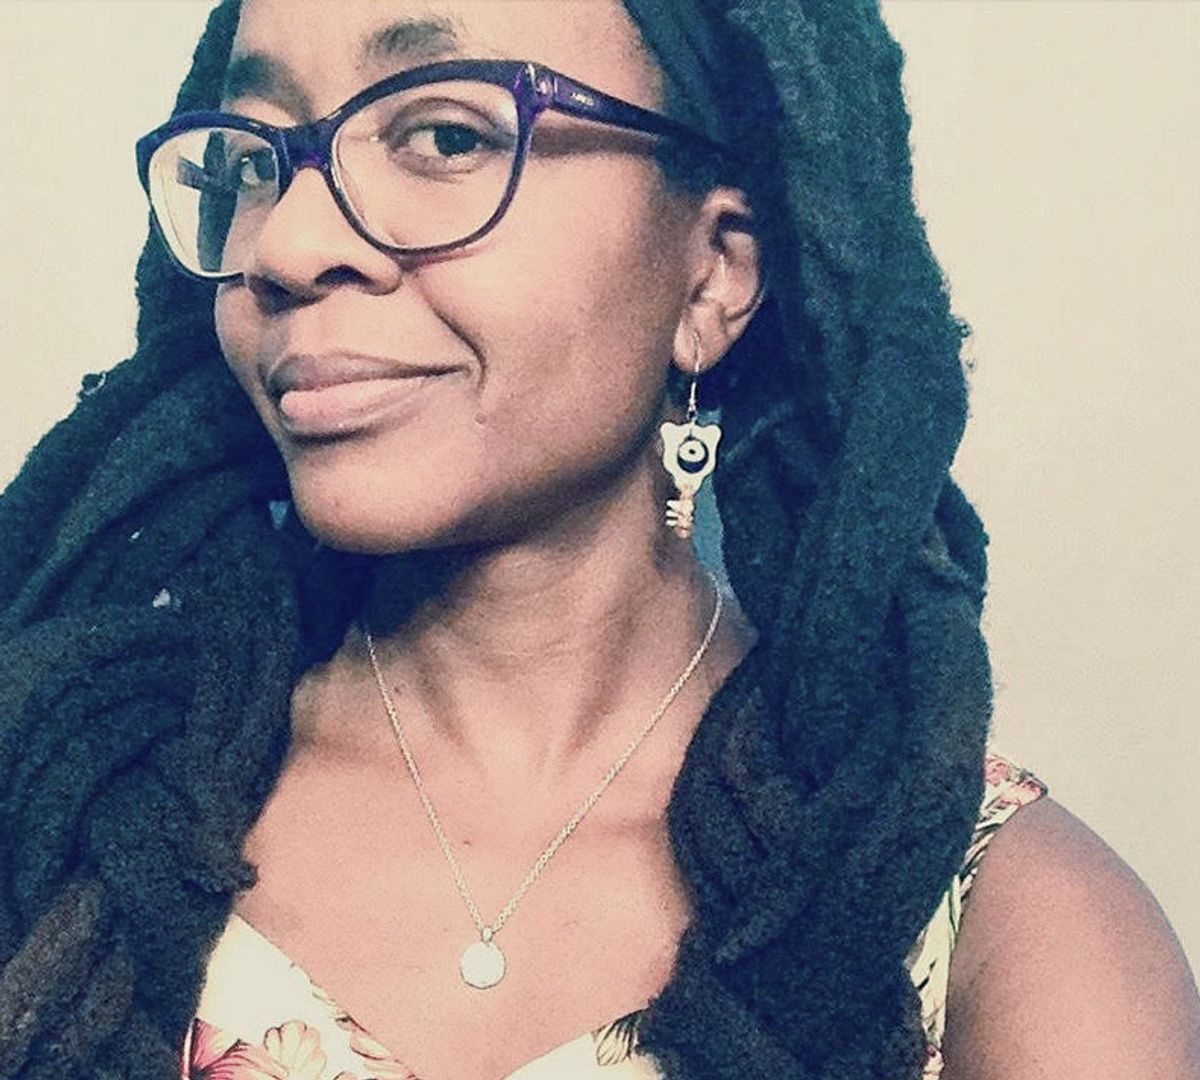 Nnedi Okorafor Tells the Story of How Publishers Once Tried to Whitewash Her Book Cover